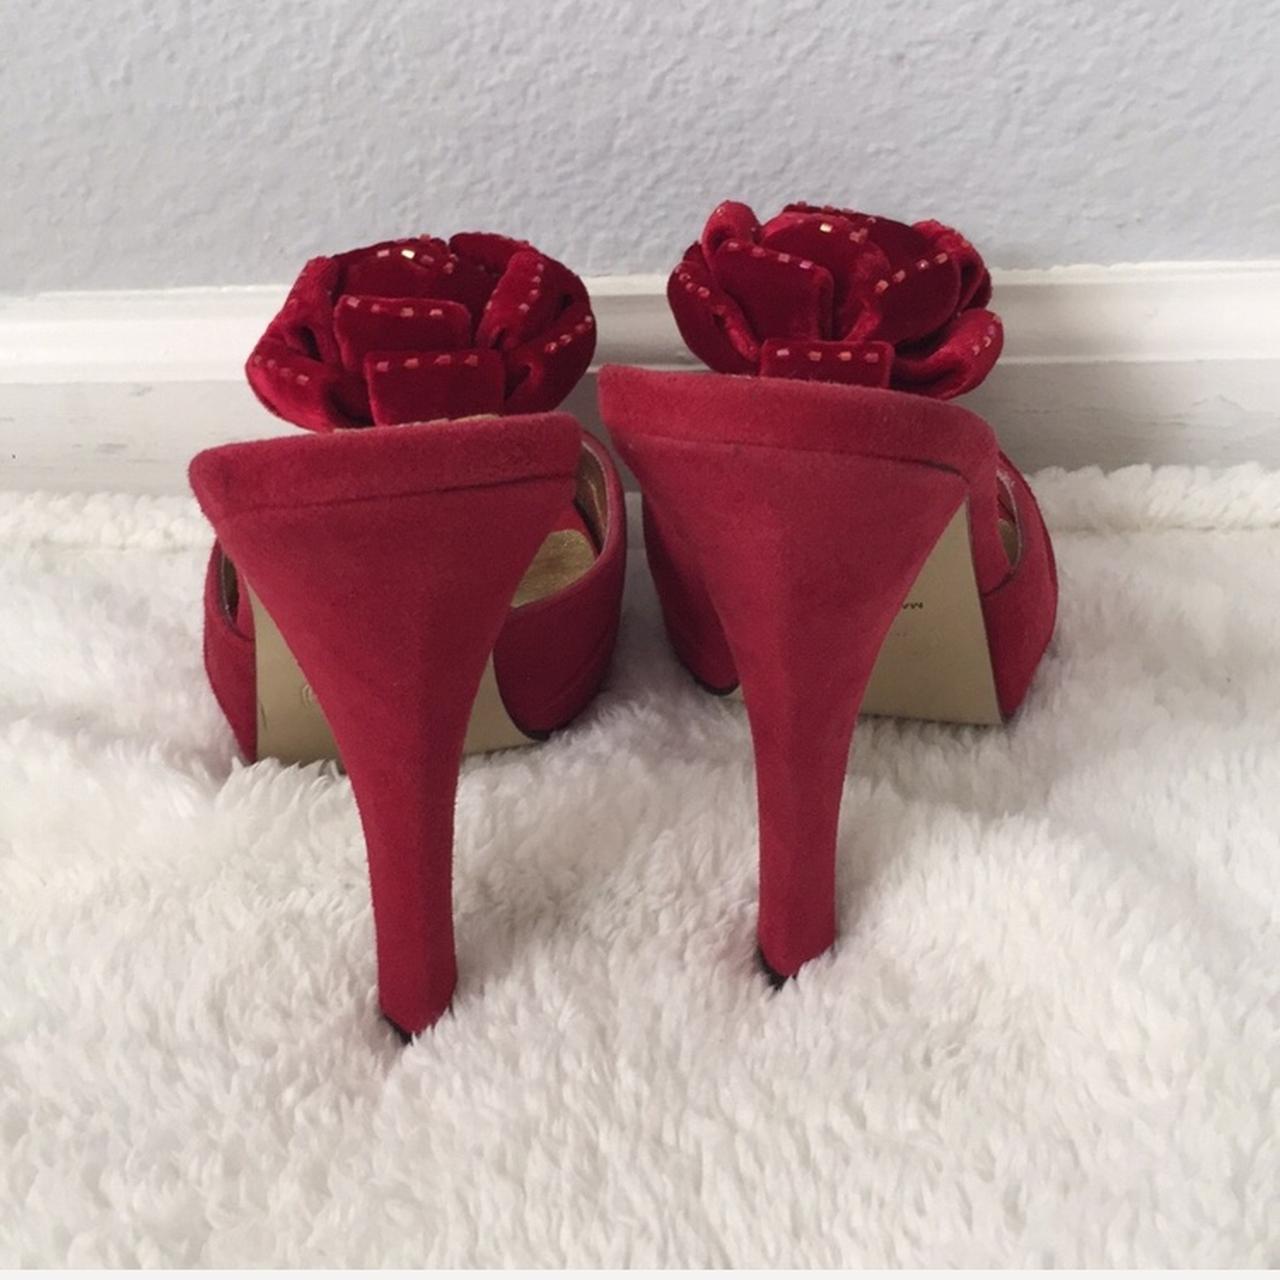 Hale Bob Women's Red and Burgundy Courts | Depop